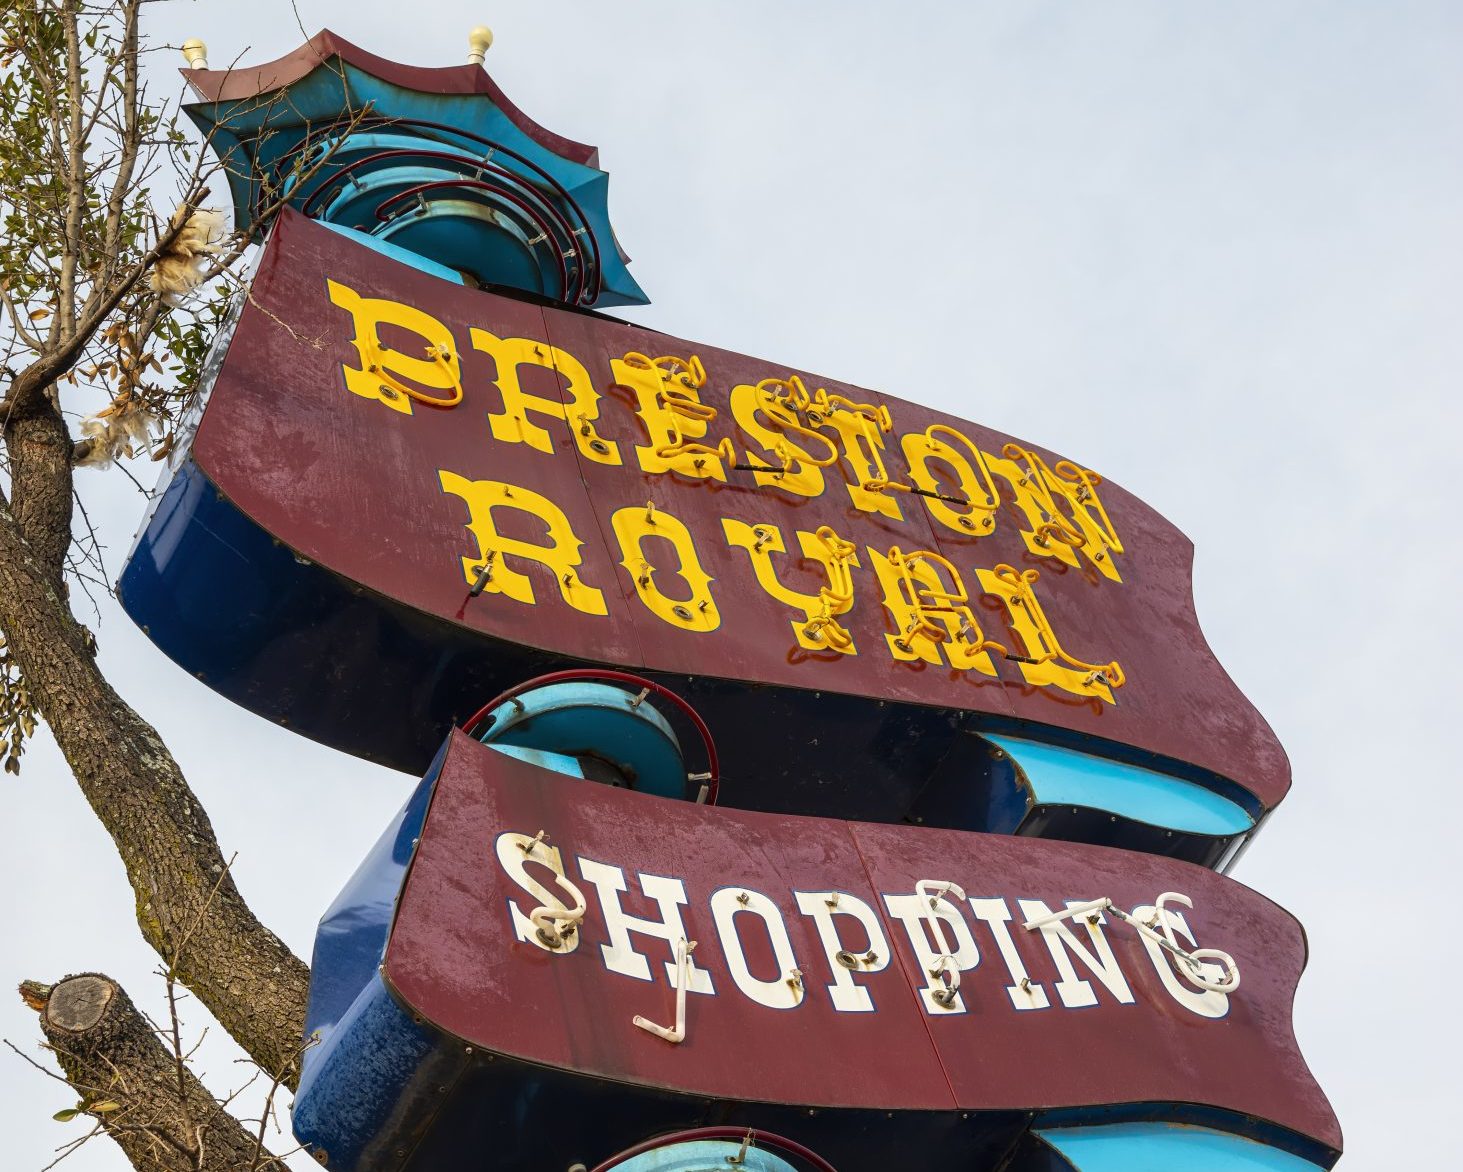 An old neon sign for the Preston Royal Shopping Center, which includes stores like Ken's Man's Shop.